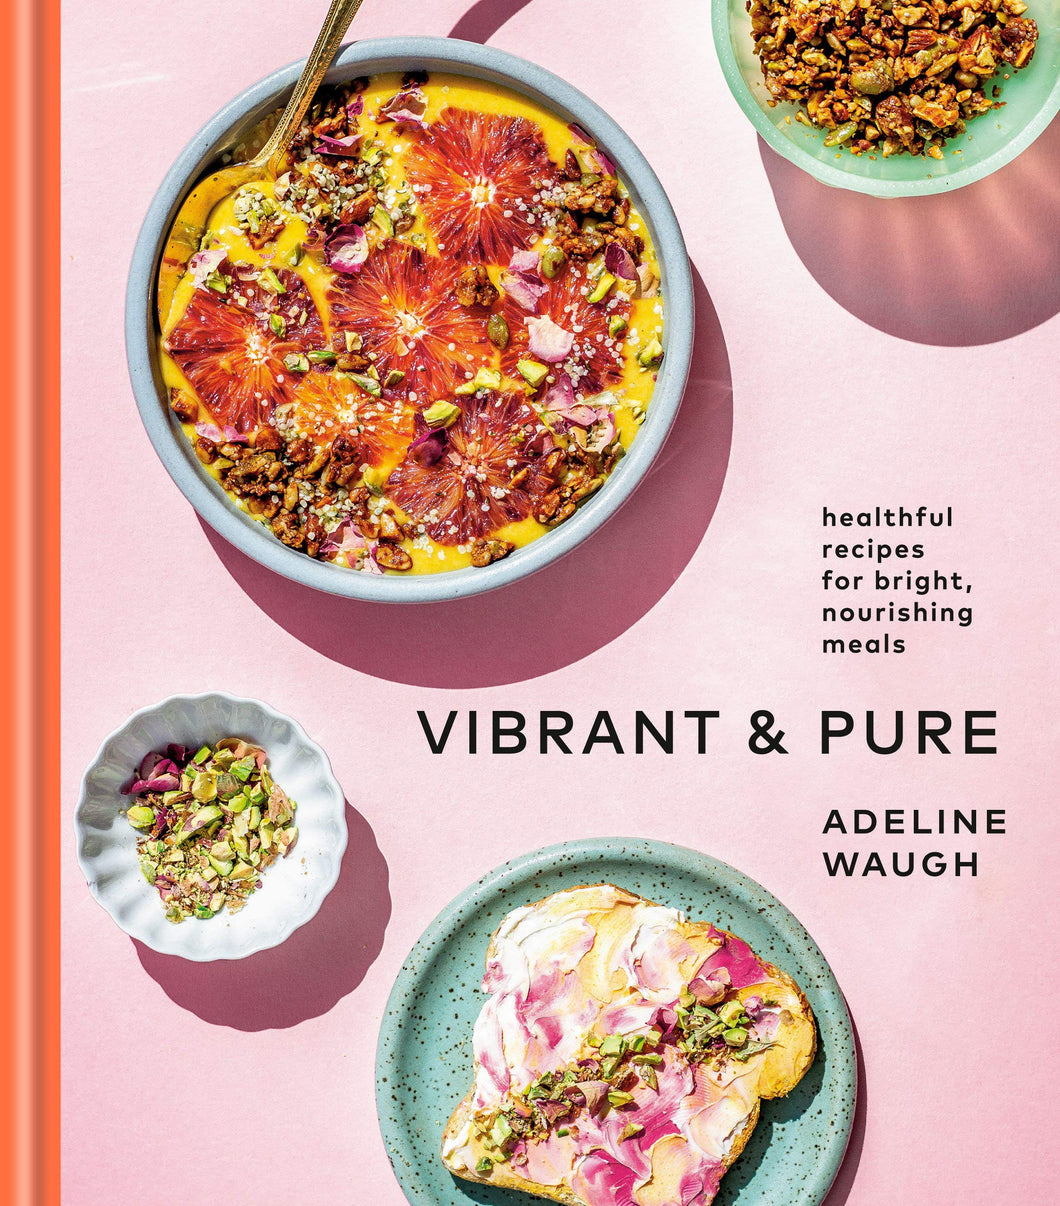 Vibrant & Pure by Adeline Waugh